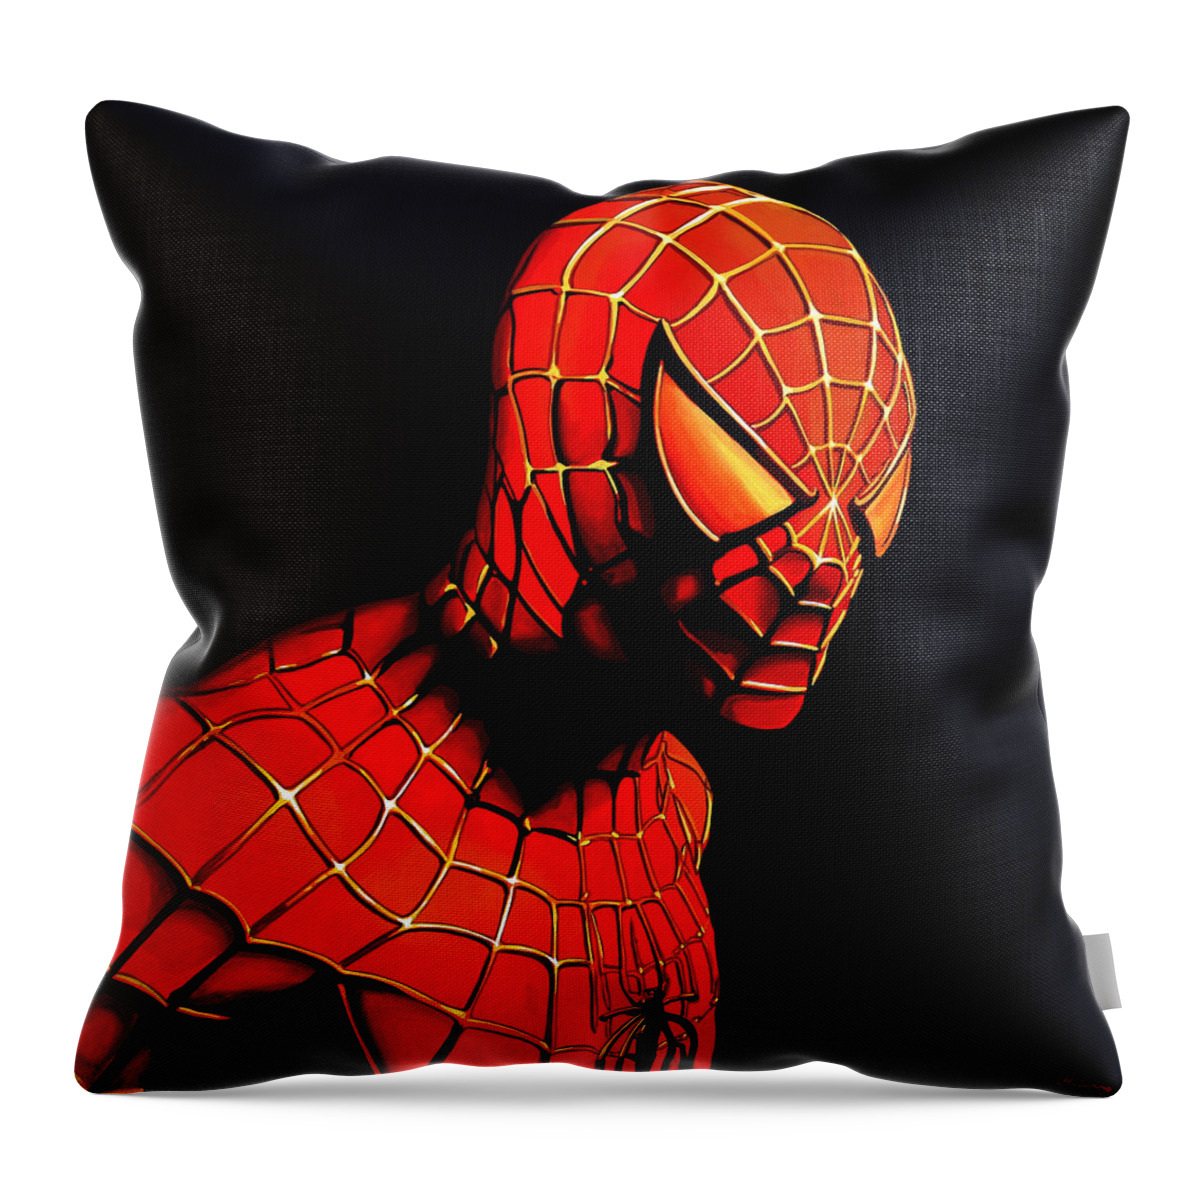 Spiderman Throw Pillow featuring the painting Spiderman by Paul Meijering